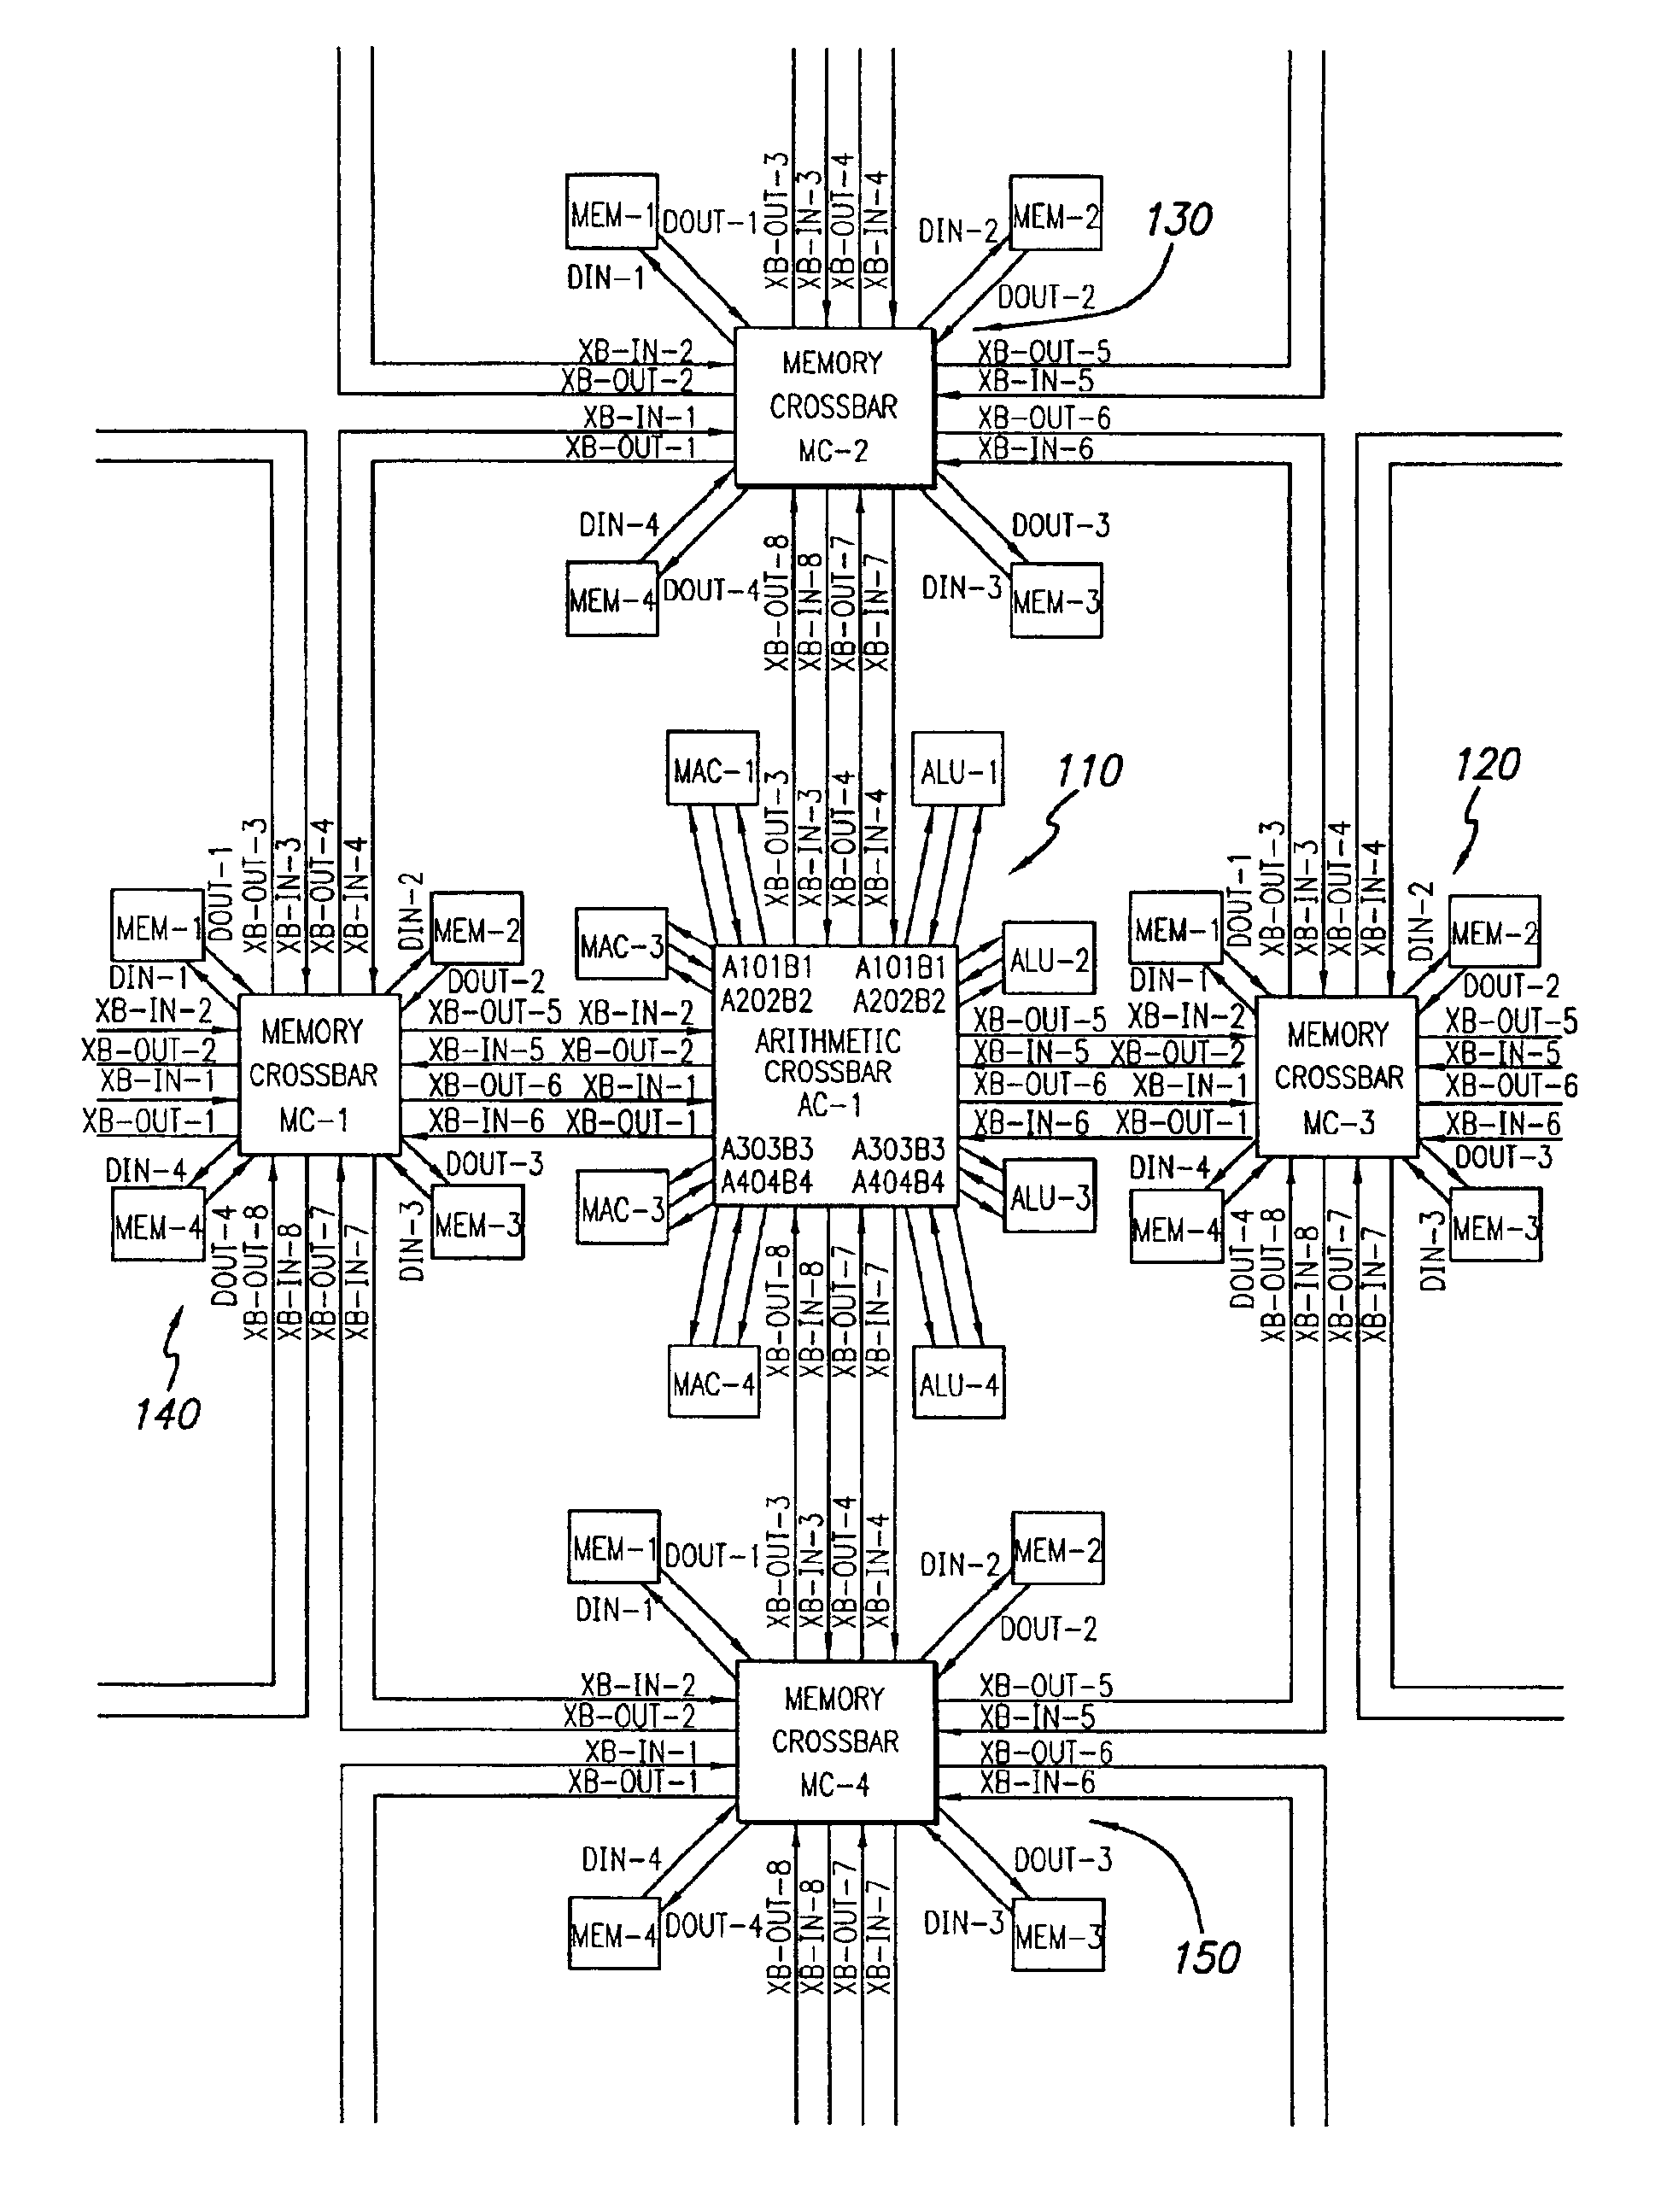 Reconfigurable processor with alternately interconnected arithmetic and memory nodes of crossbar switched cluster